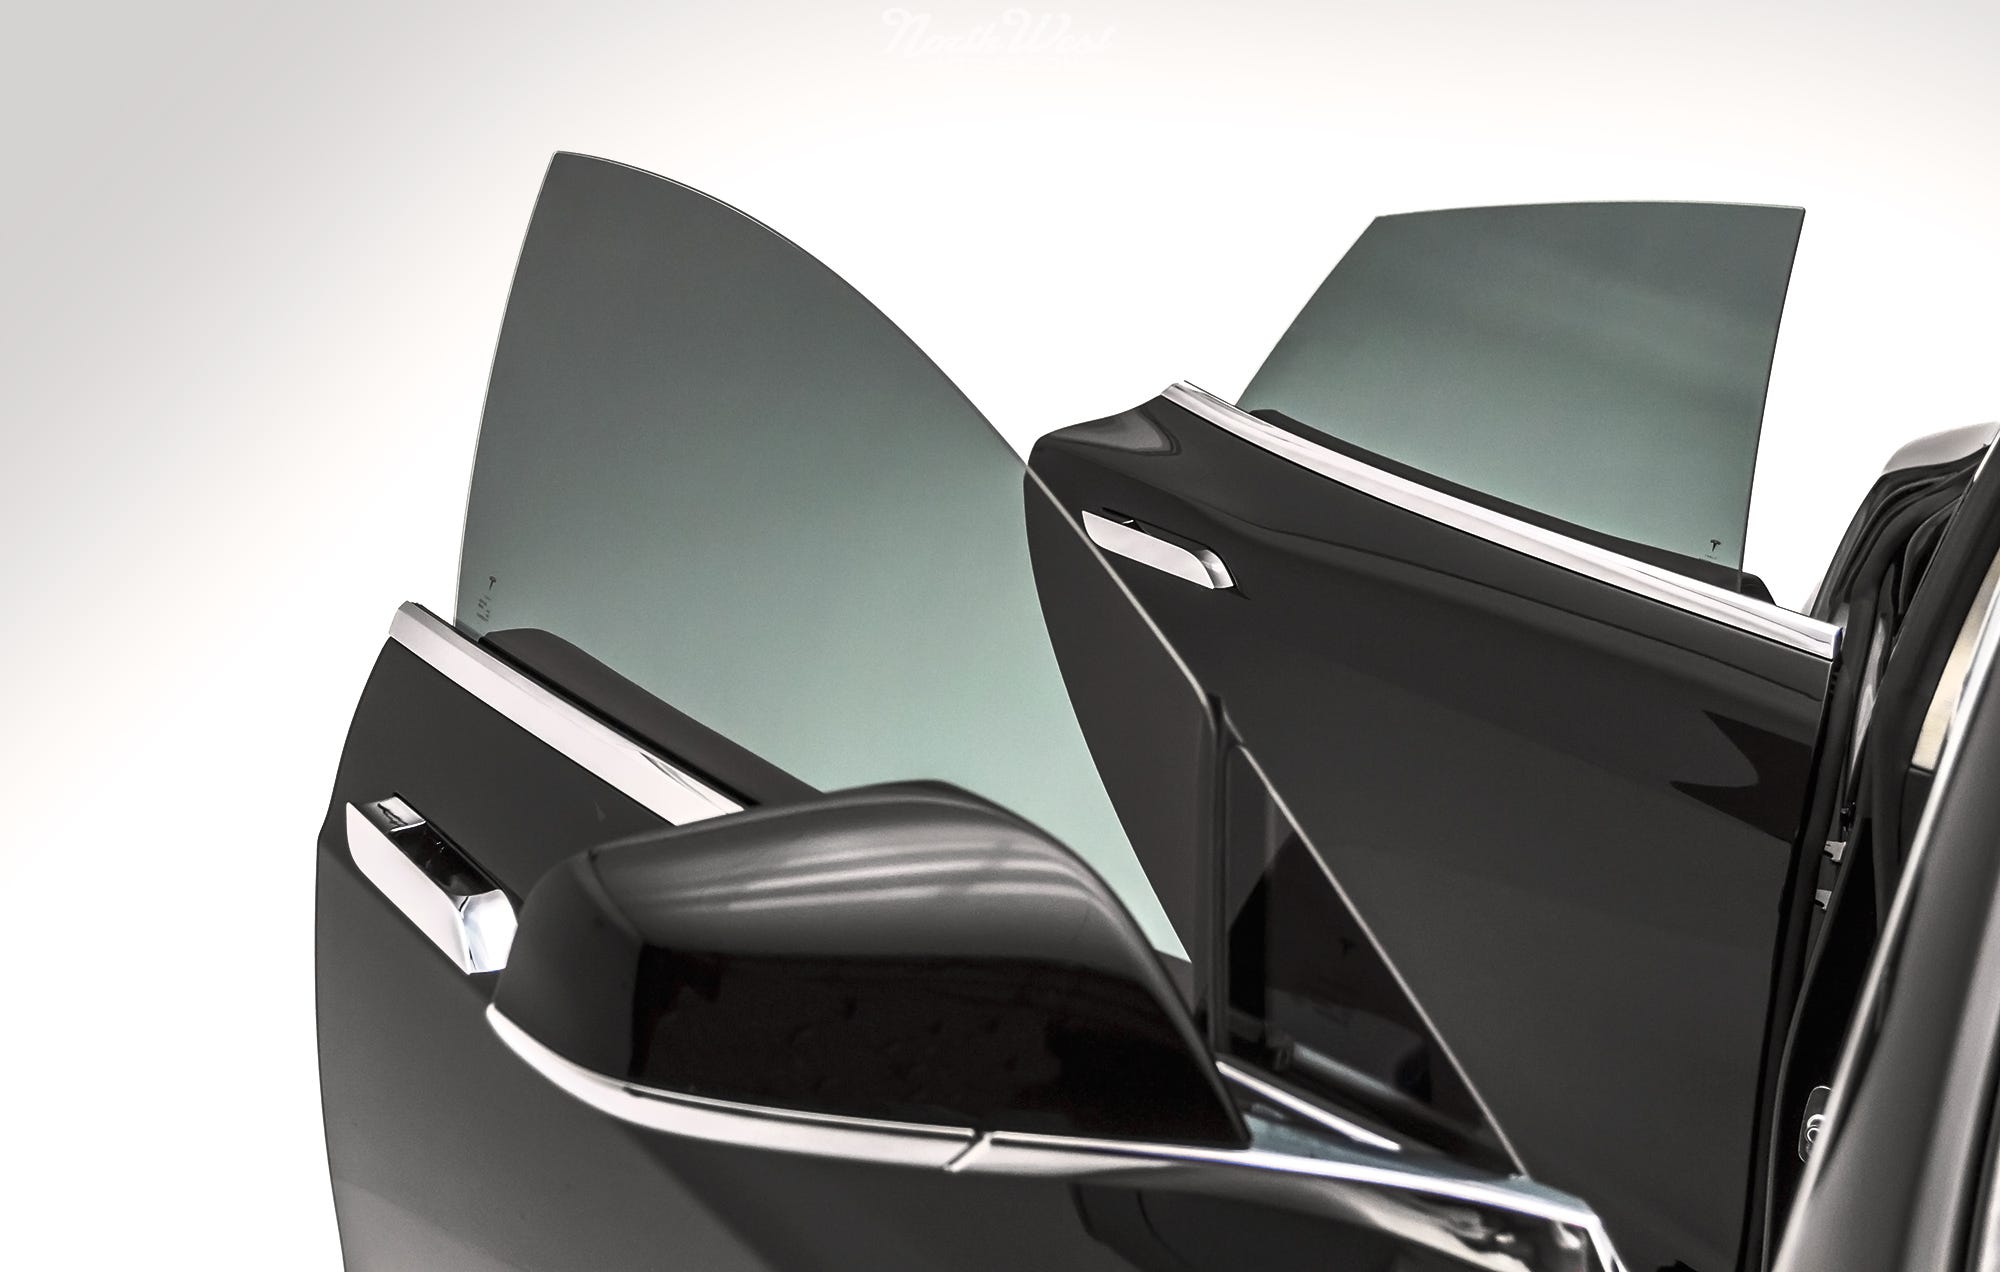 Types of Car Window Tint Films. Car window tinting is one of the most